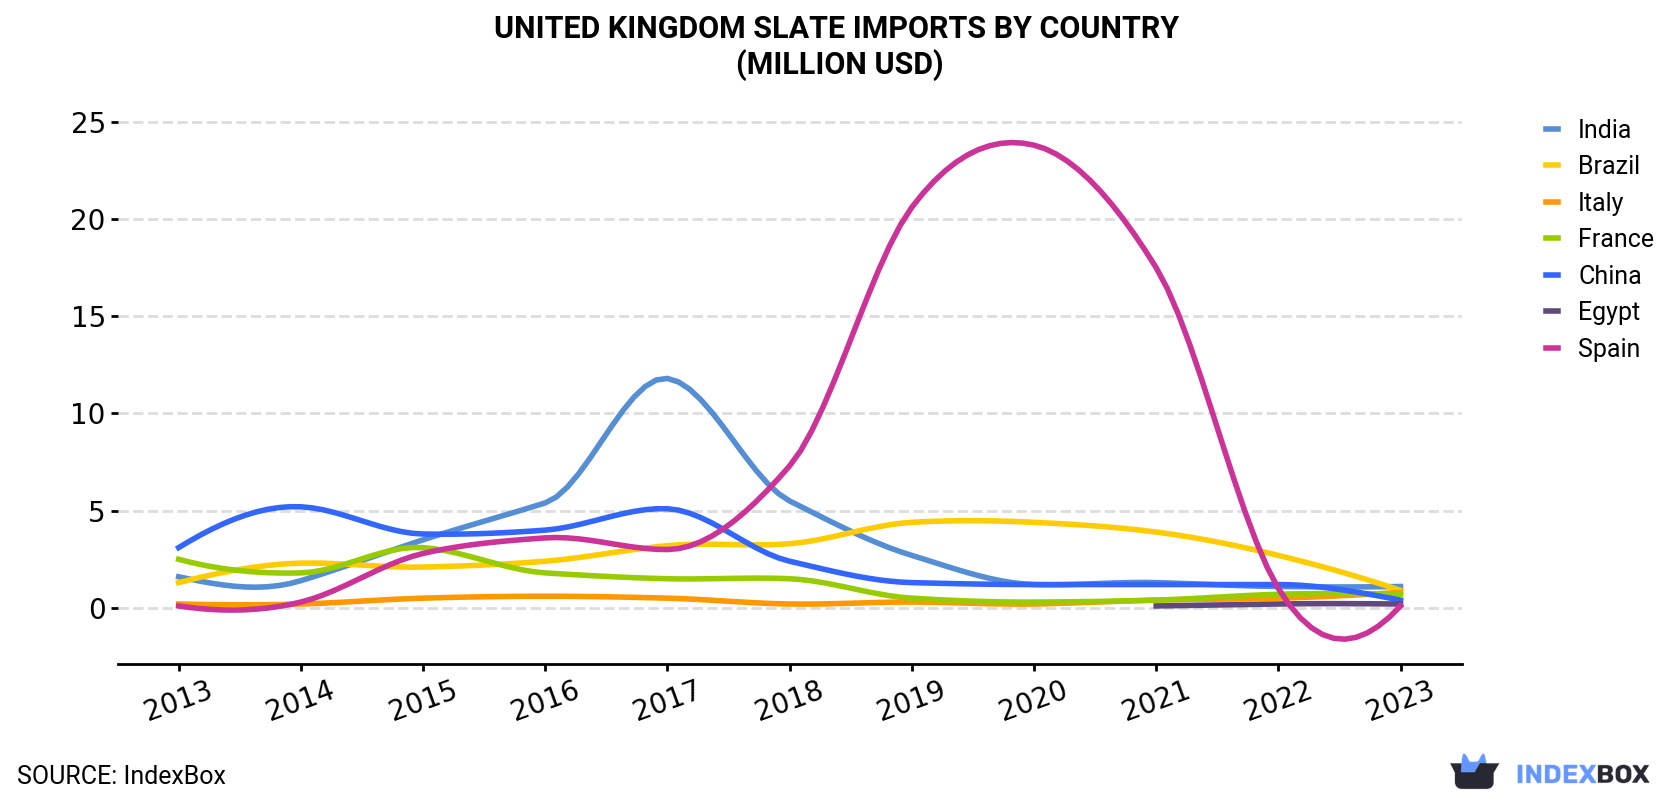 United Kingdom Slate Imports By Country (Million USD)